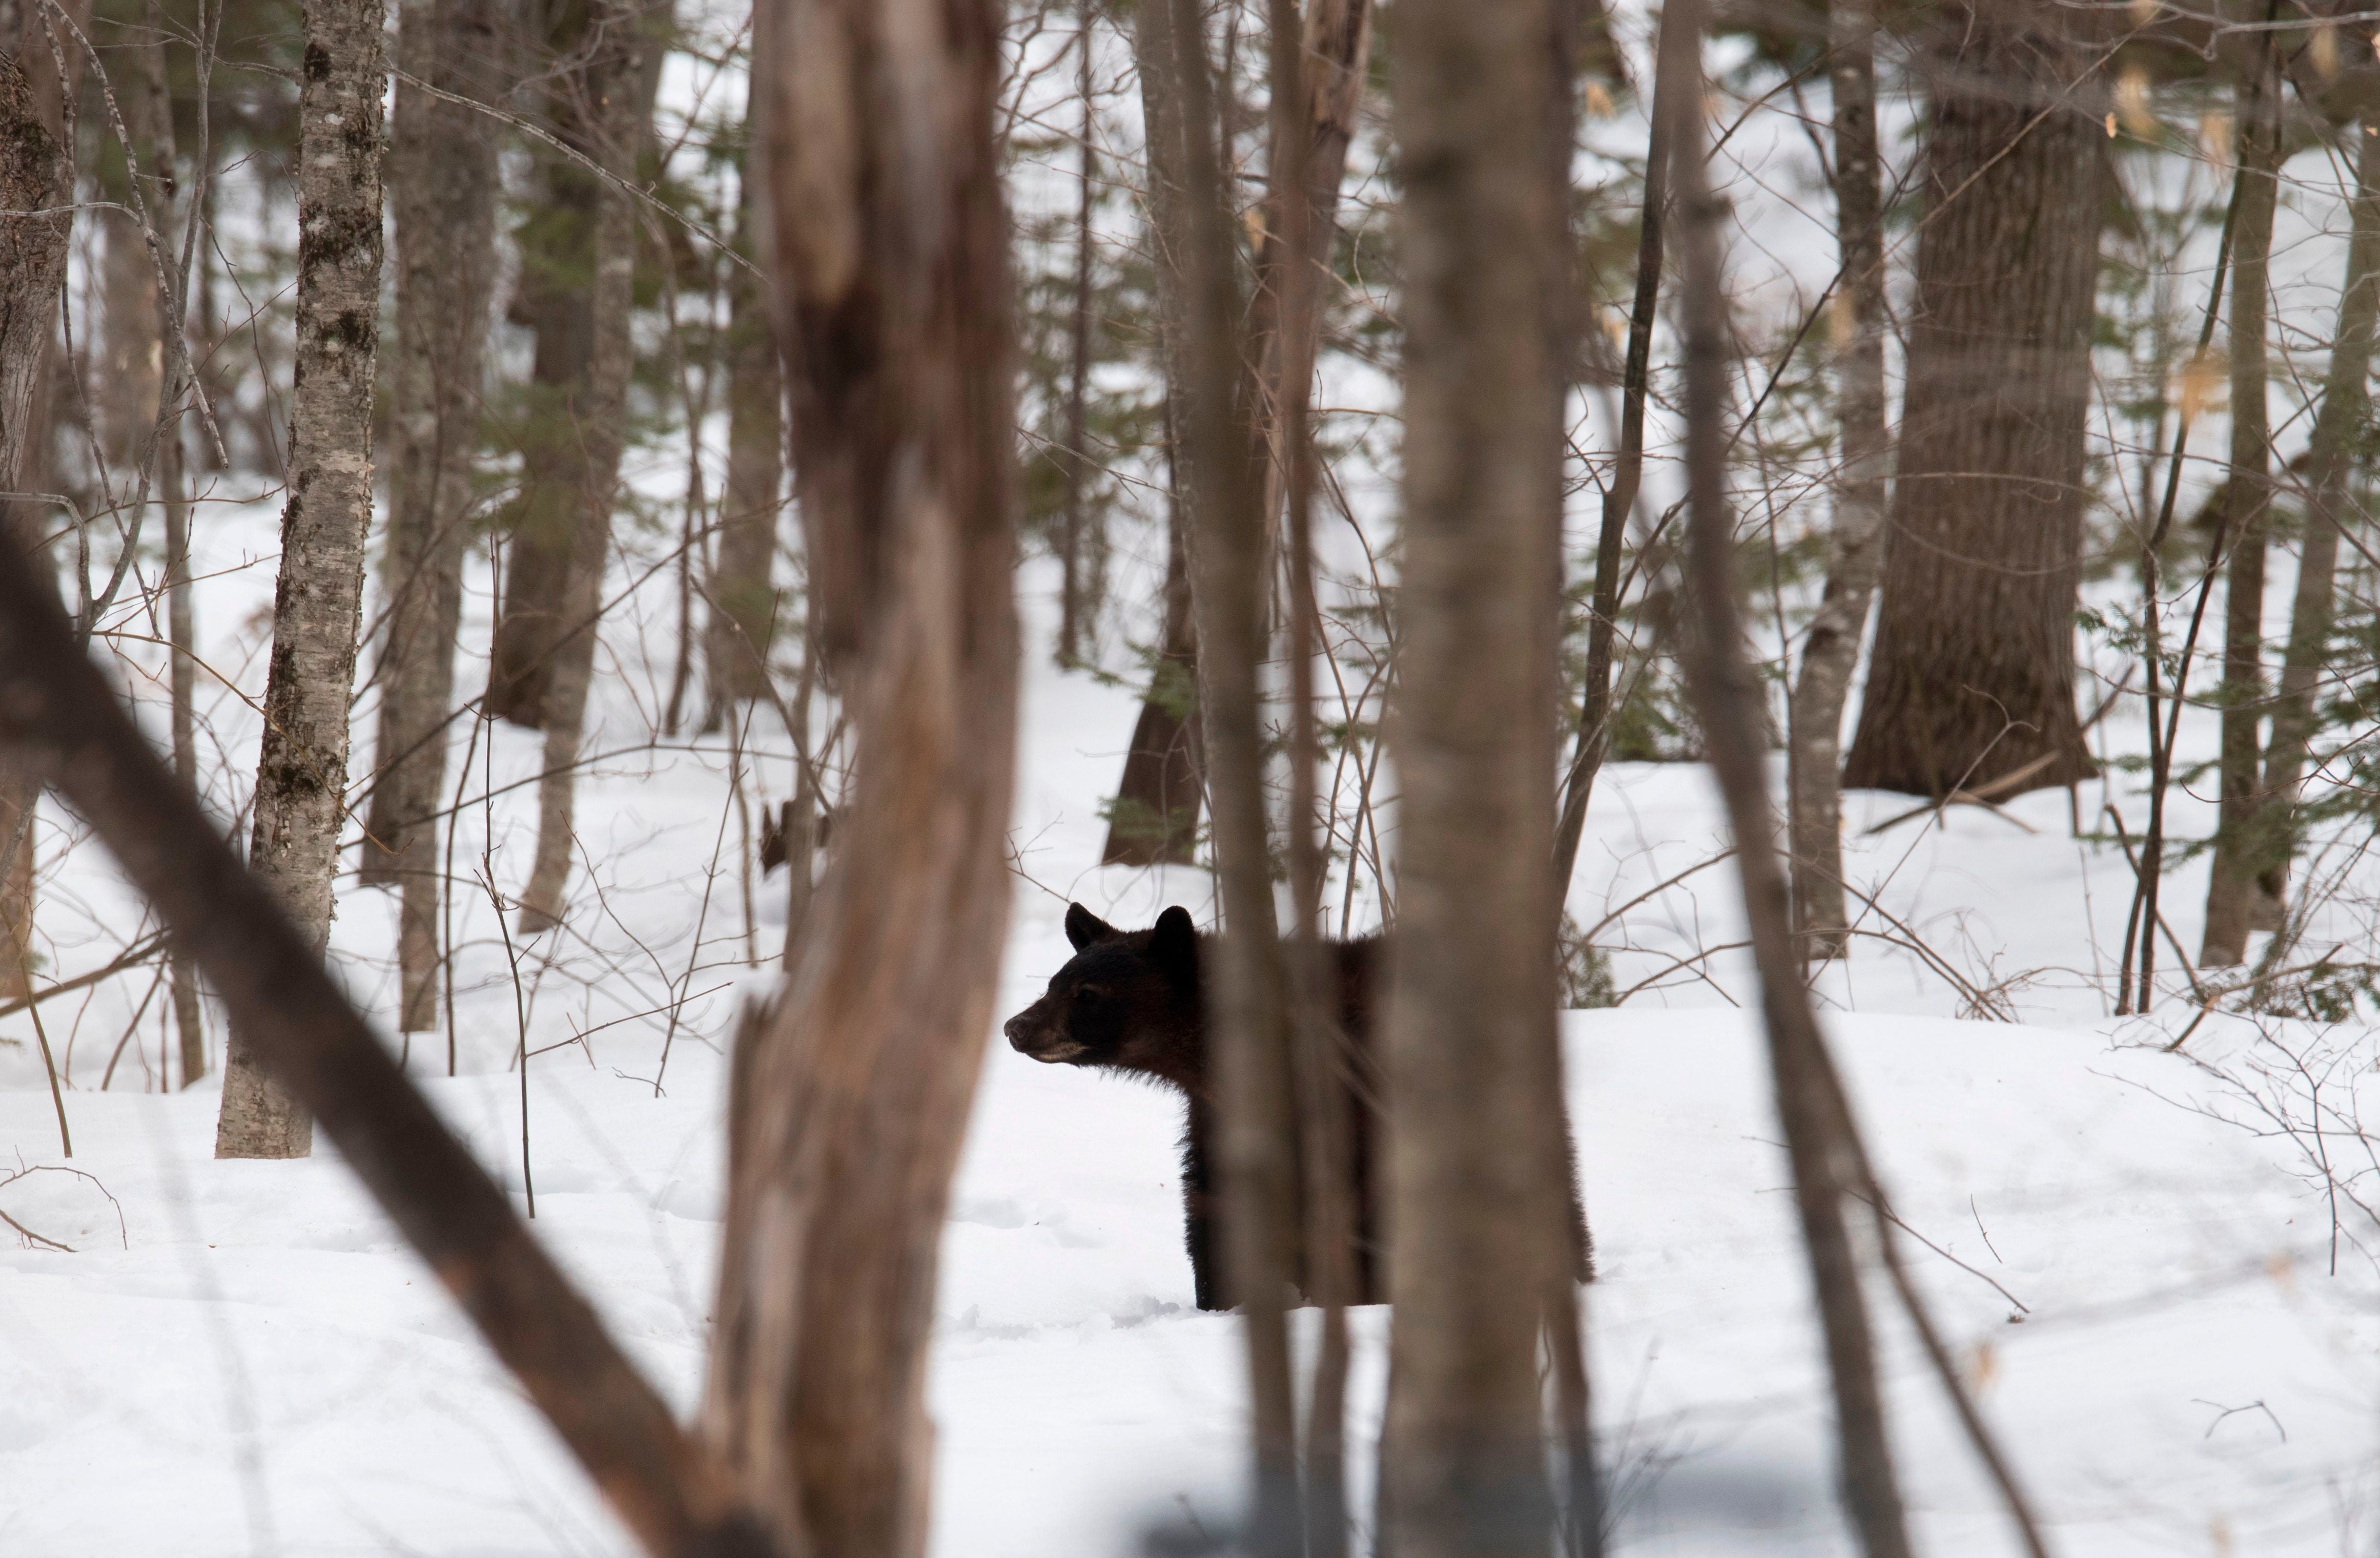 Black bears are found across parts of New England (stock image)